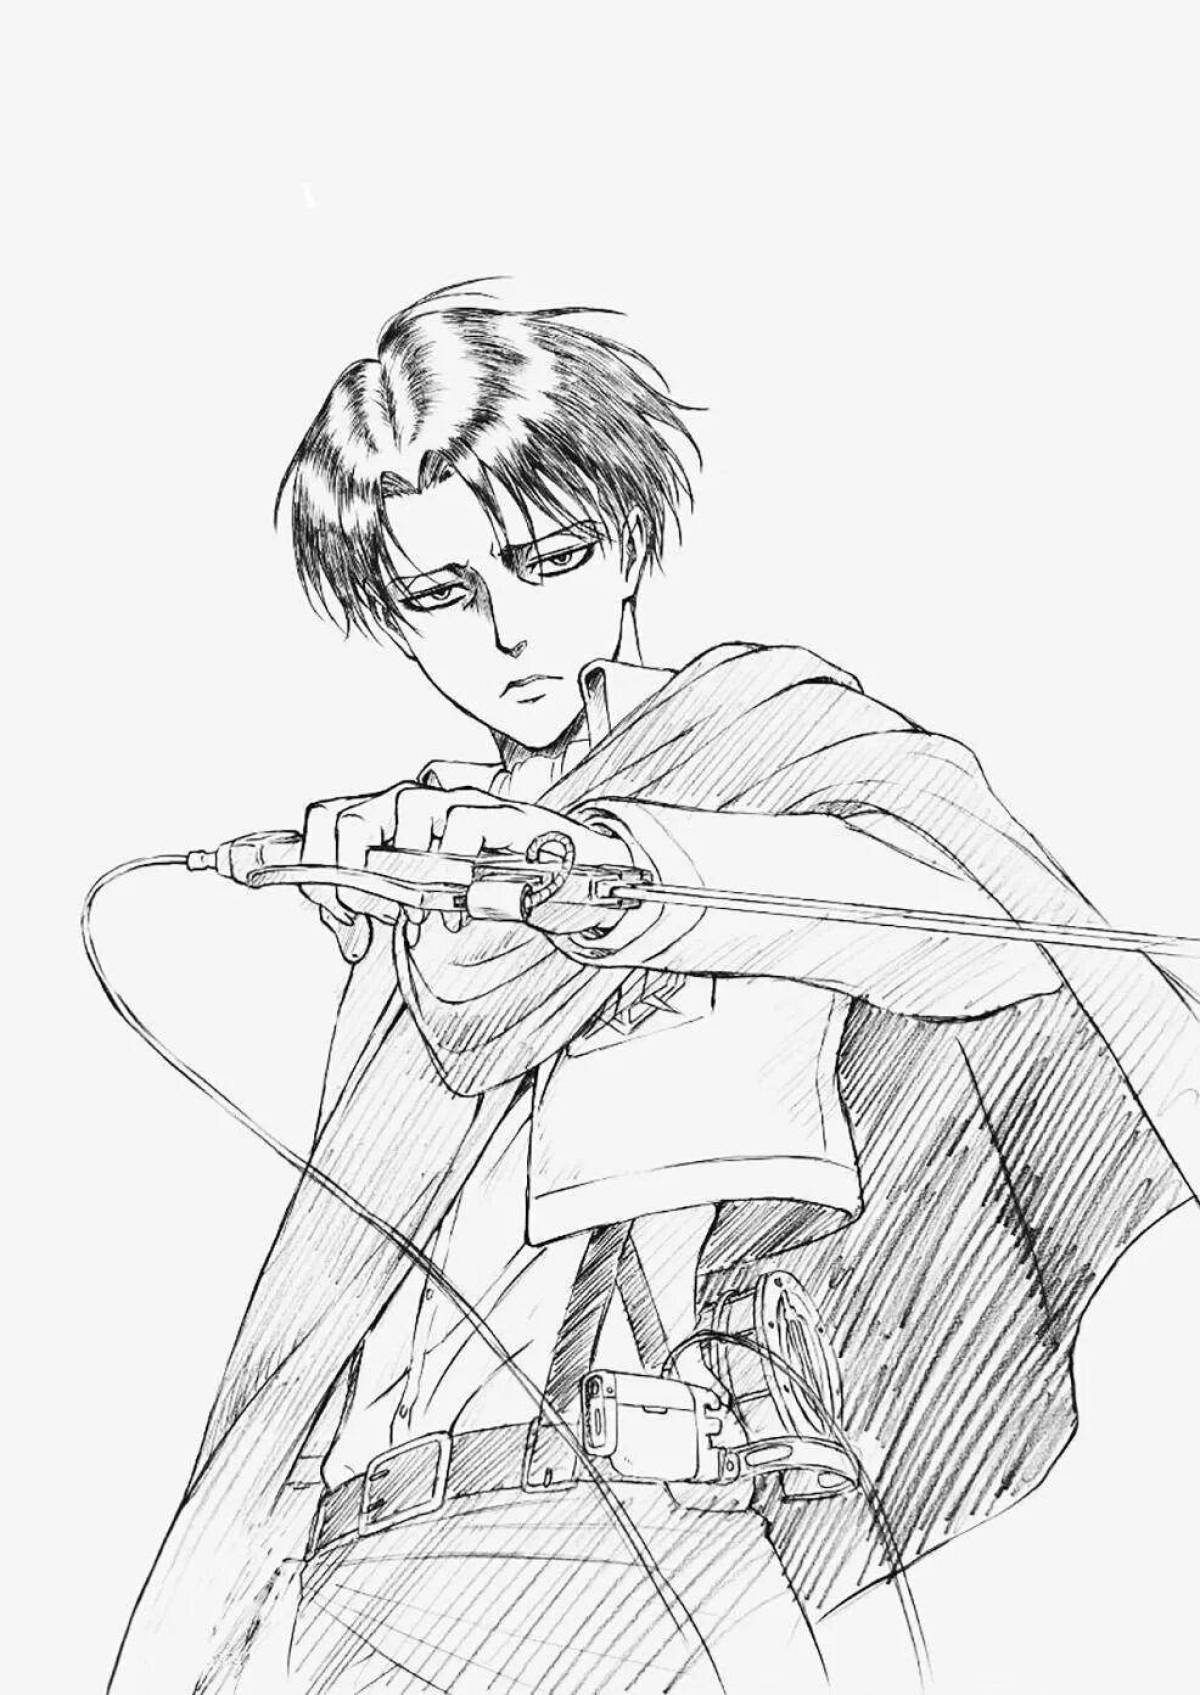 Great coloring attack on titan levi